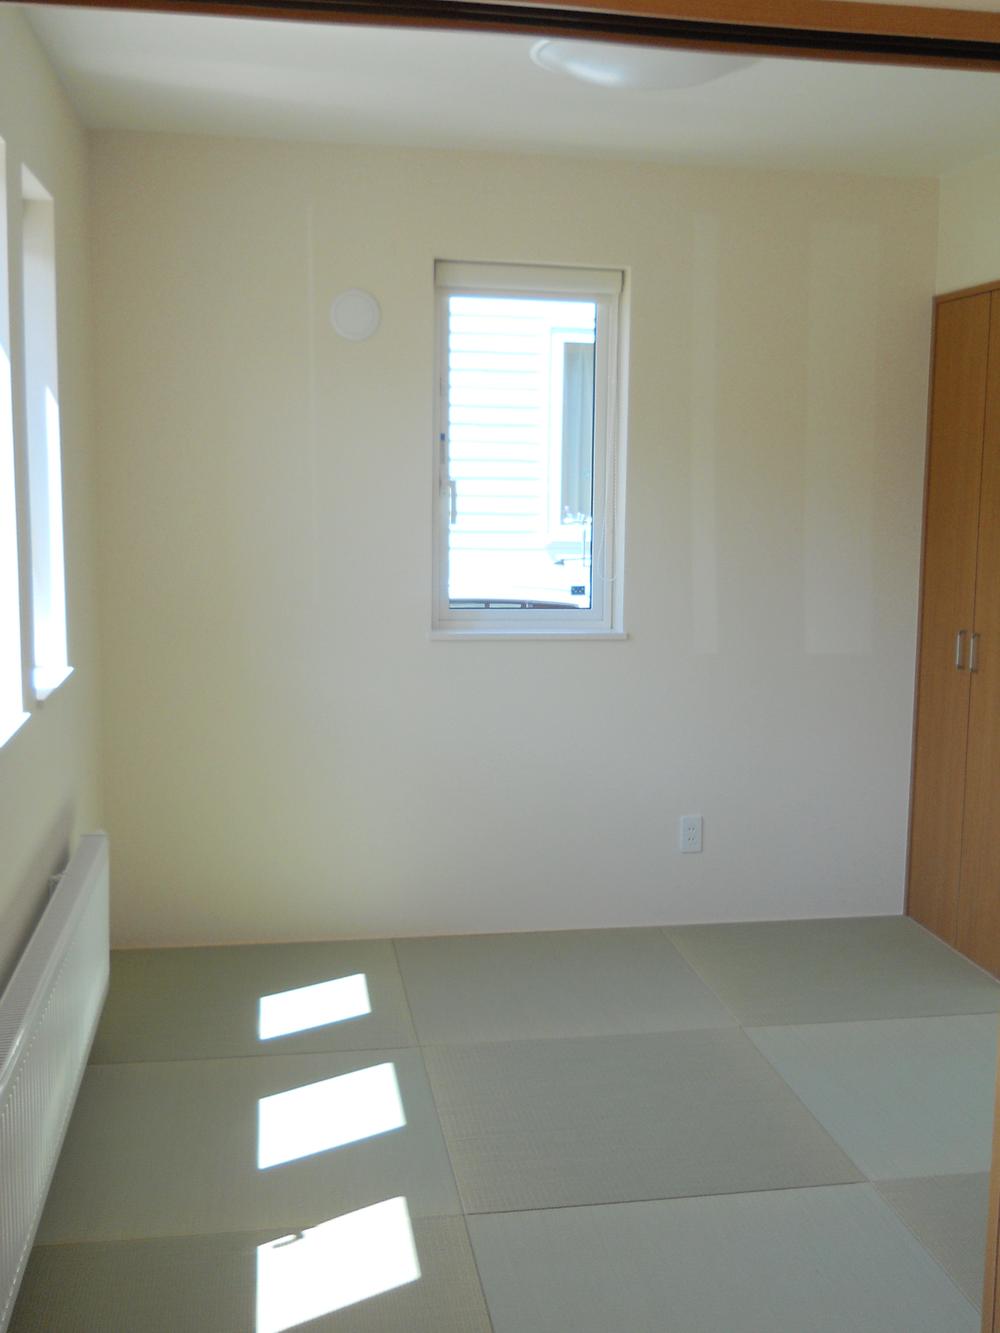 Same specifications photos (Other introspection). New Japanese-style room